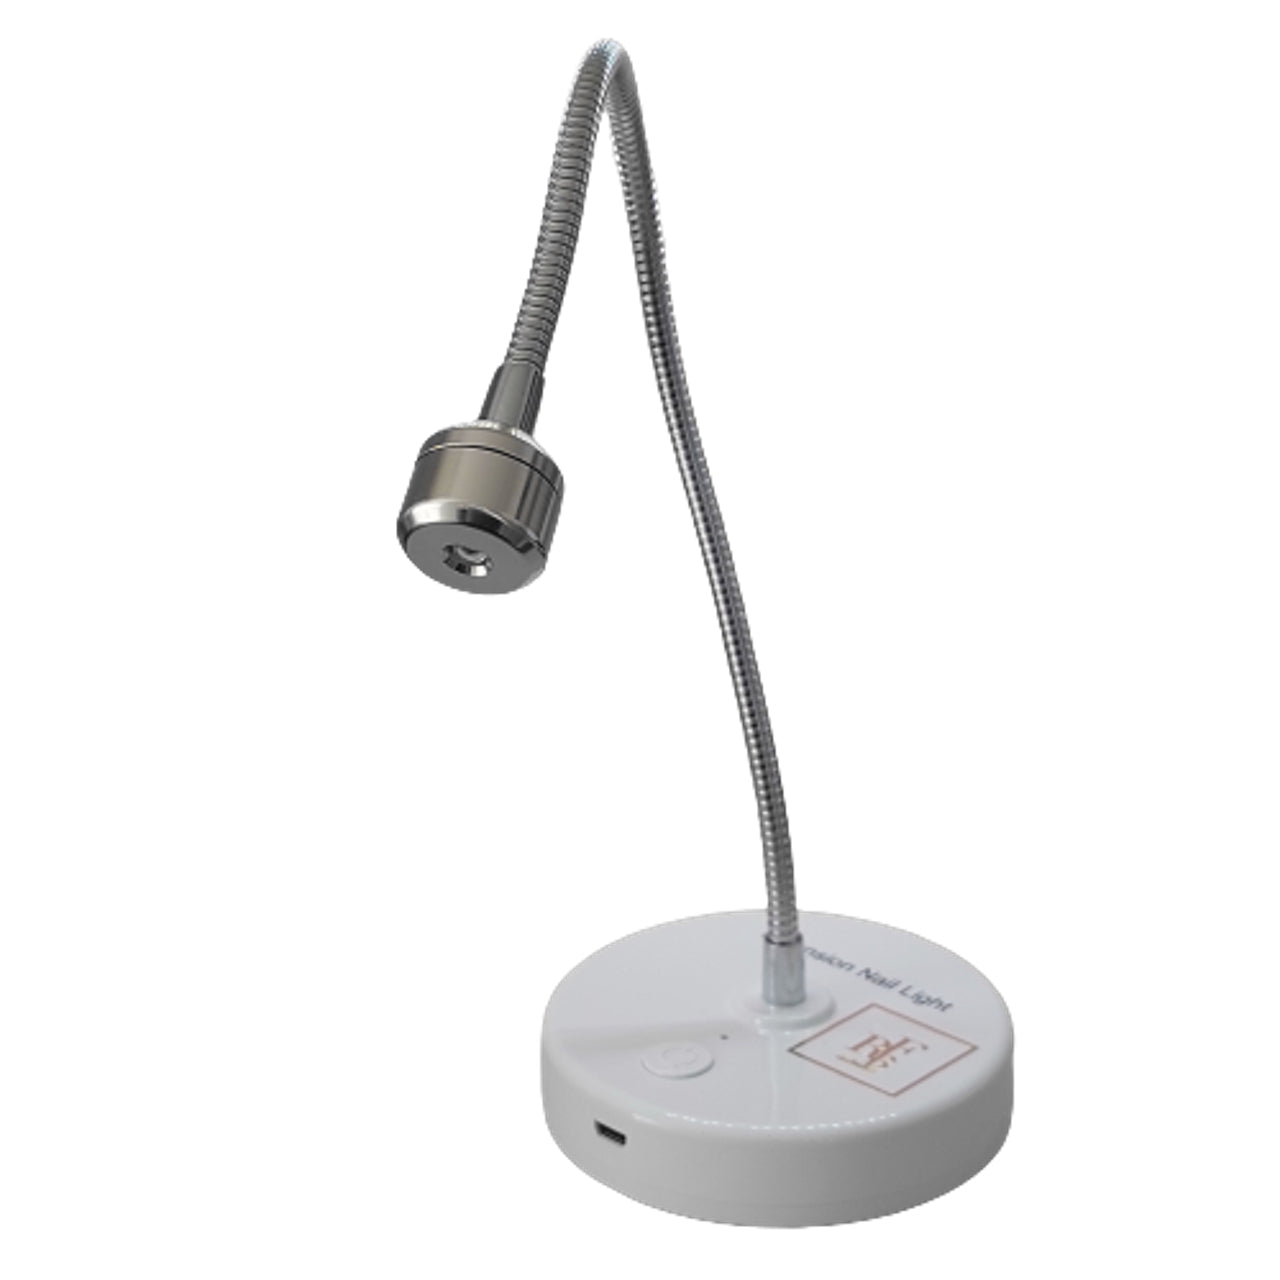 Adjustable LED Lamp - Portable & Rechargeable